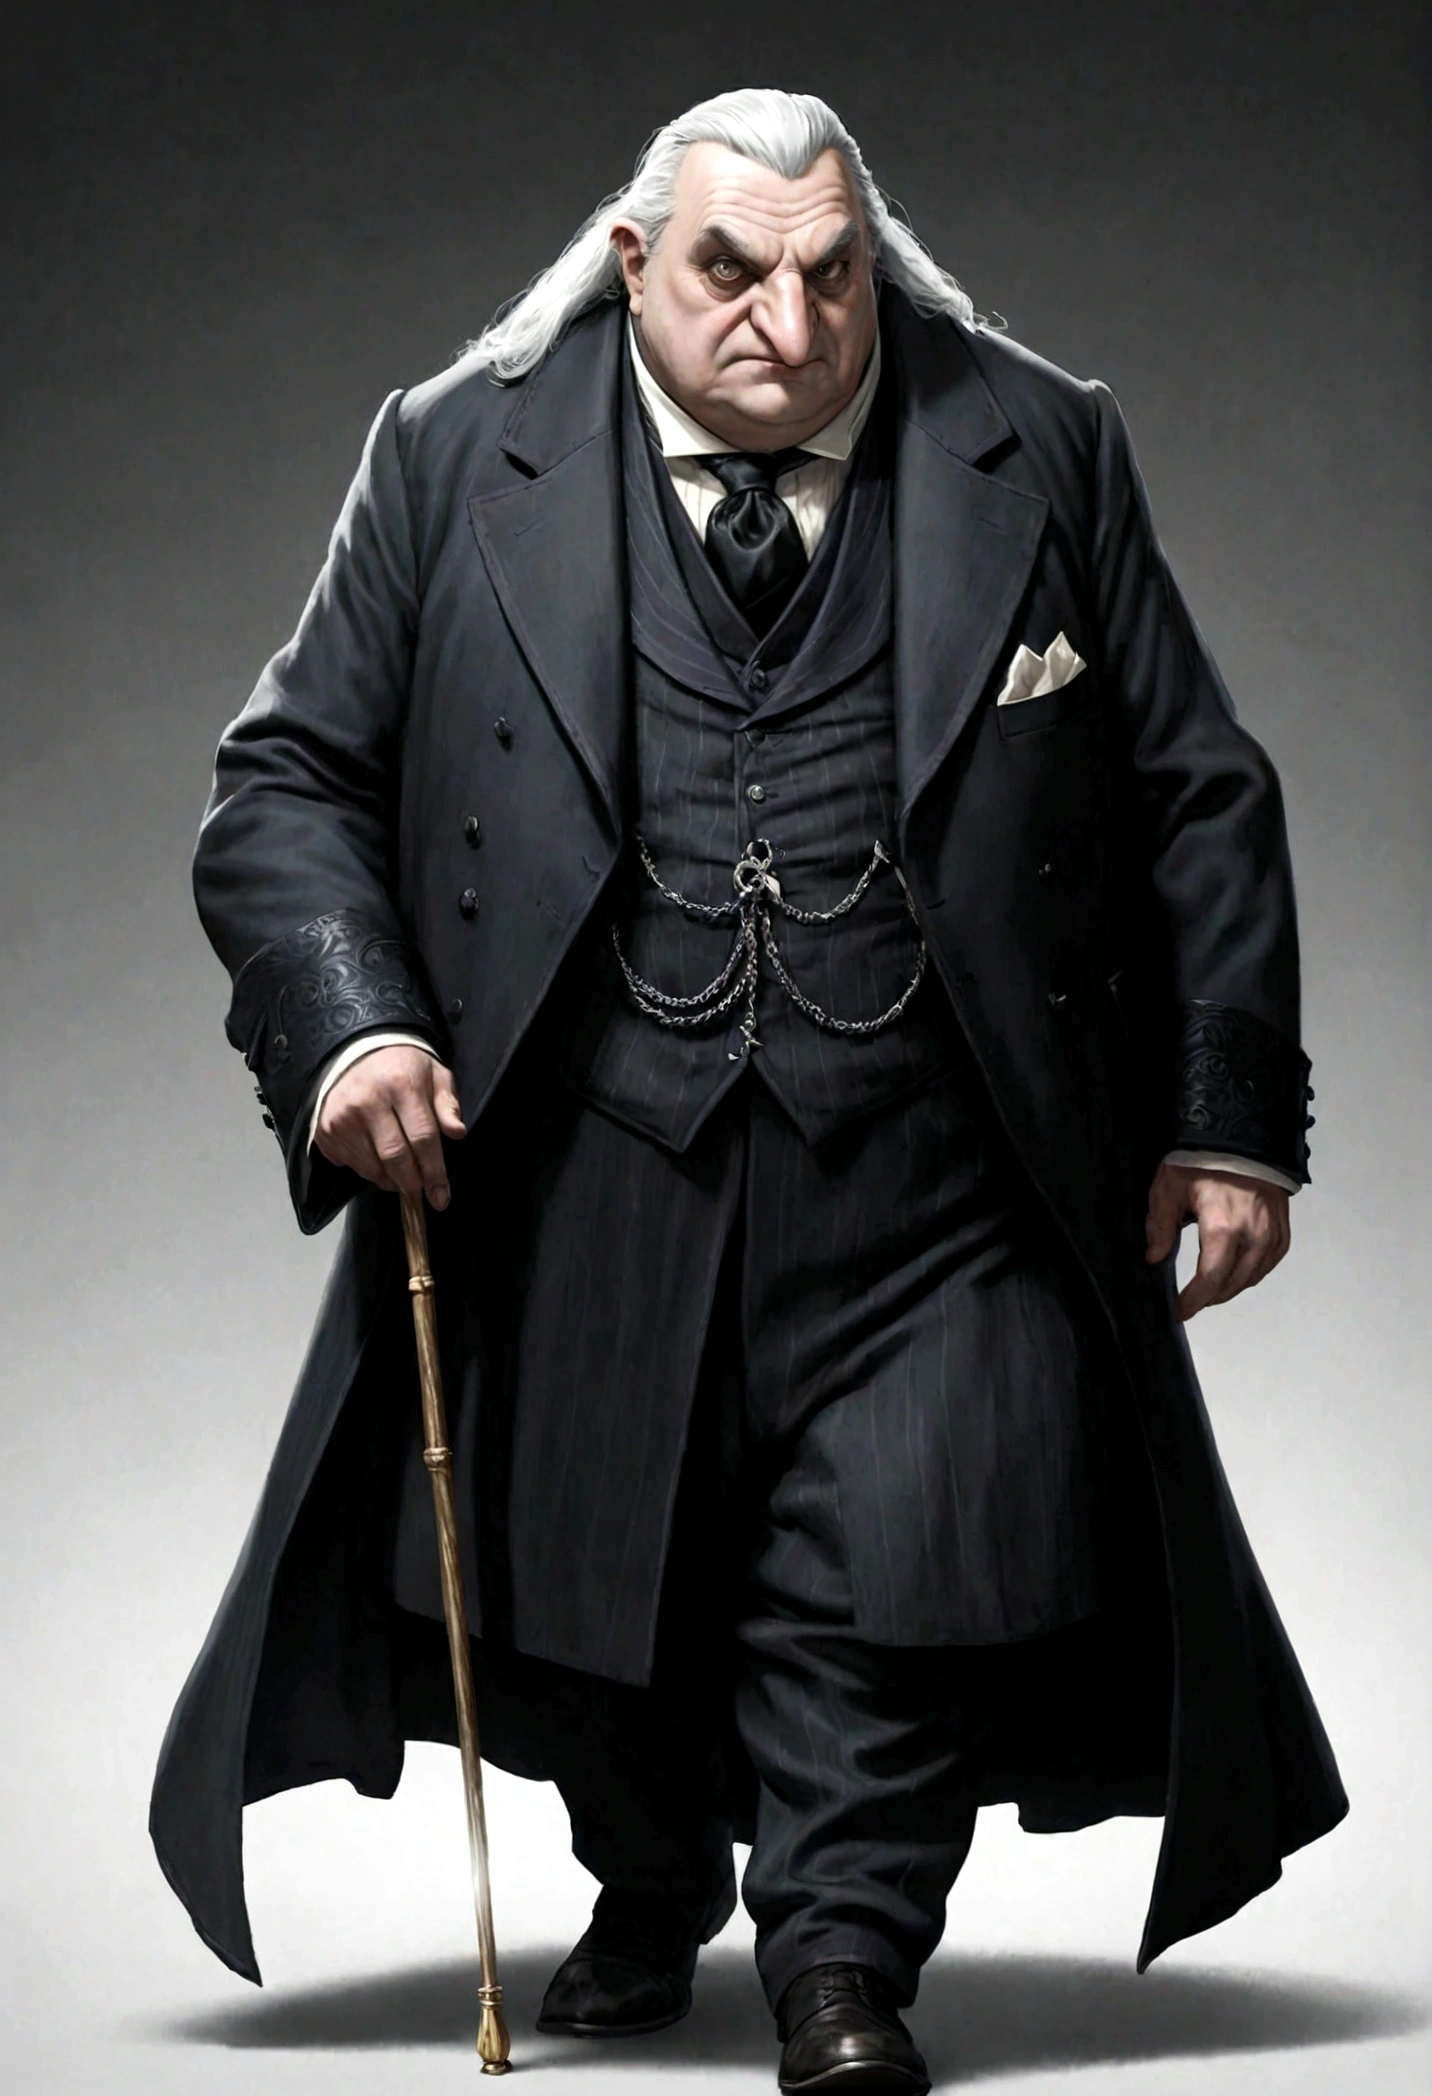 (Lord Theodore Cobblepot, in his mid-sixties, is a short and stout man. Known by the nickname "Penguin" due to his hunched posture and waddling gait, his white hair, pointed nose, and thin lips give him a cunning and sly appearance. His eyes, sharp and piercing like those of a predatory bird, add to his menacing demeanor. He typically wears dark, expensive suits made from fine fabrics. His elegant cane and silver-embellished ring symbolize his wealth and status.) ((dnd noble)), ((medieval age noble))
